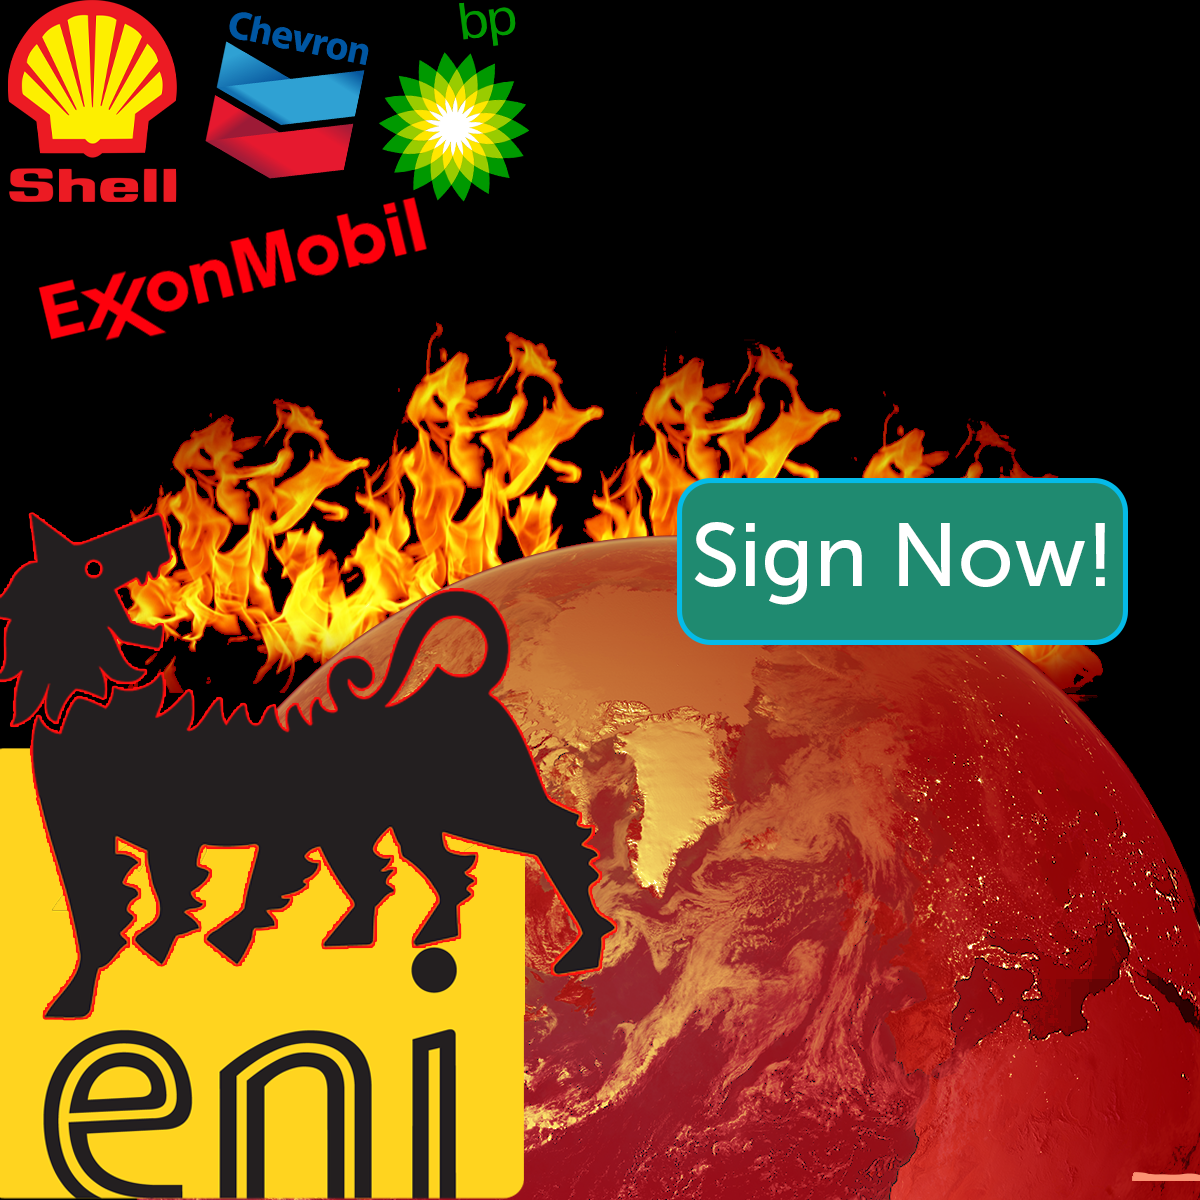 It's Big oil vs the world Sign now to stand with us!